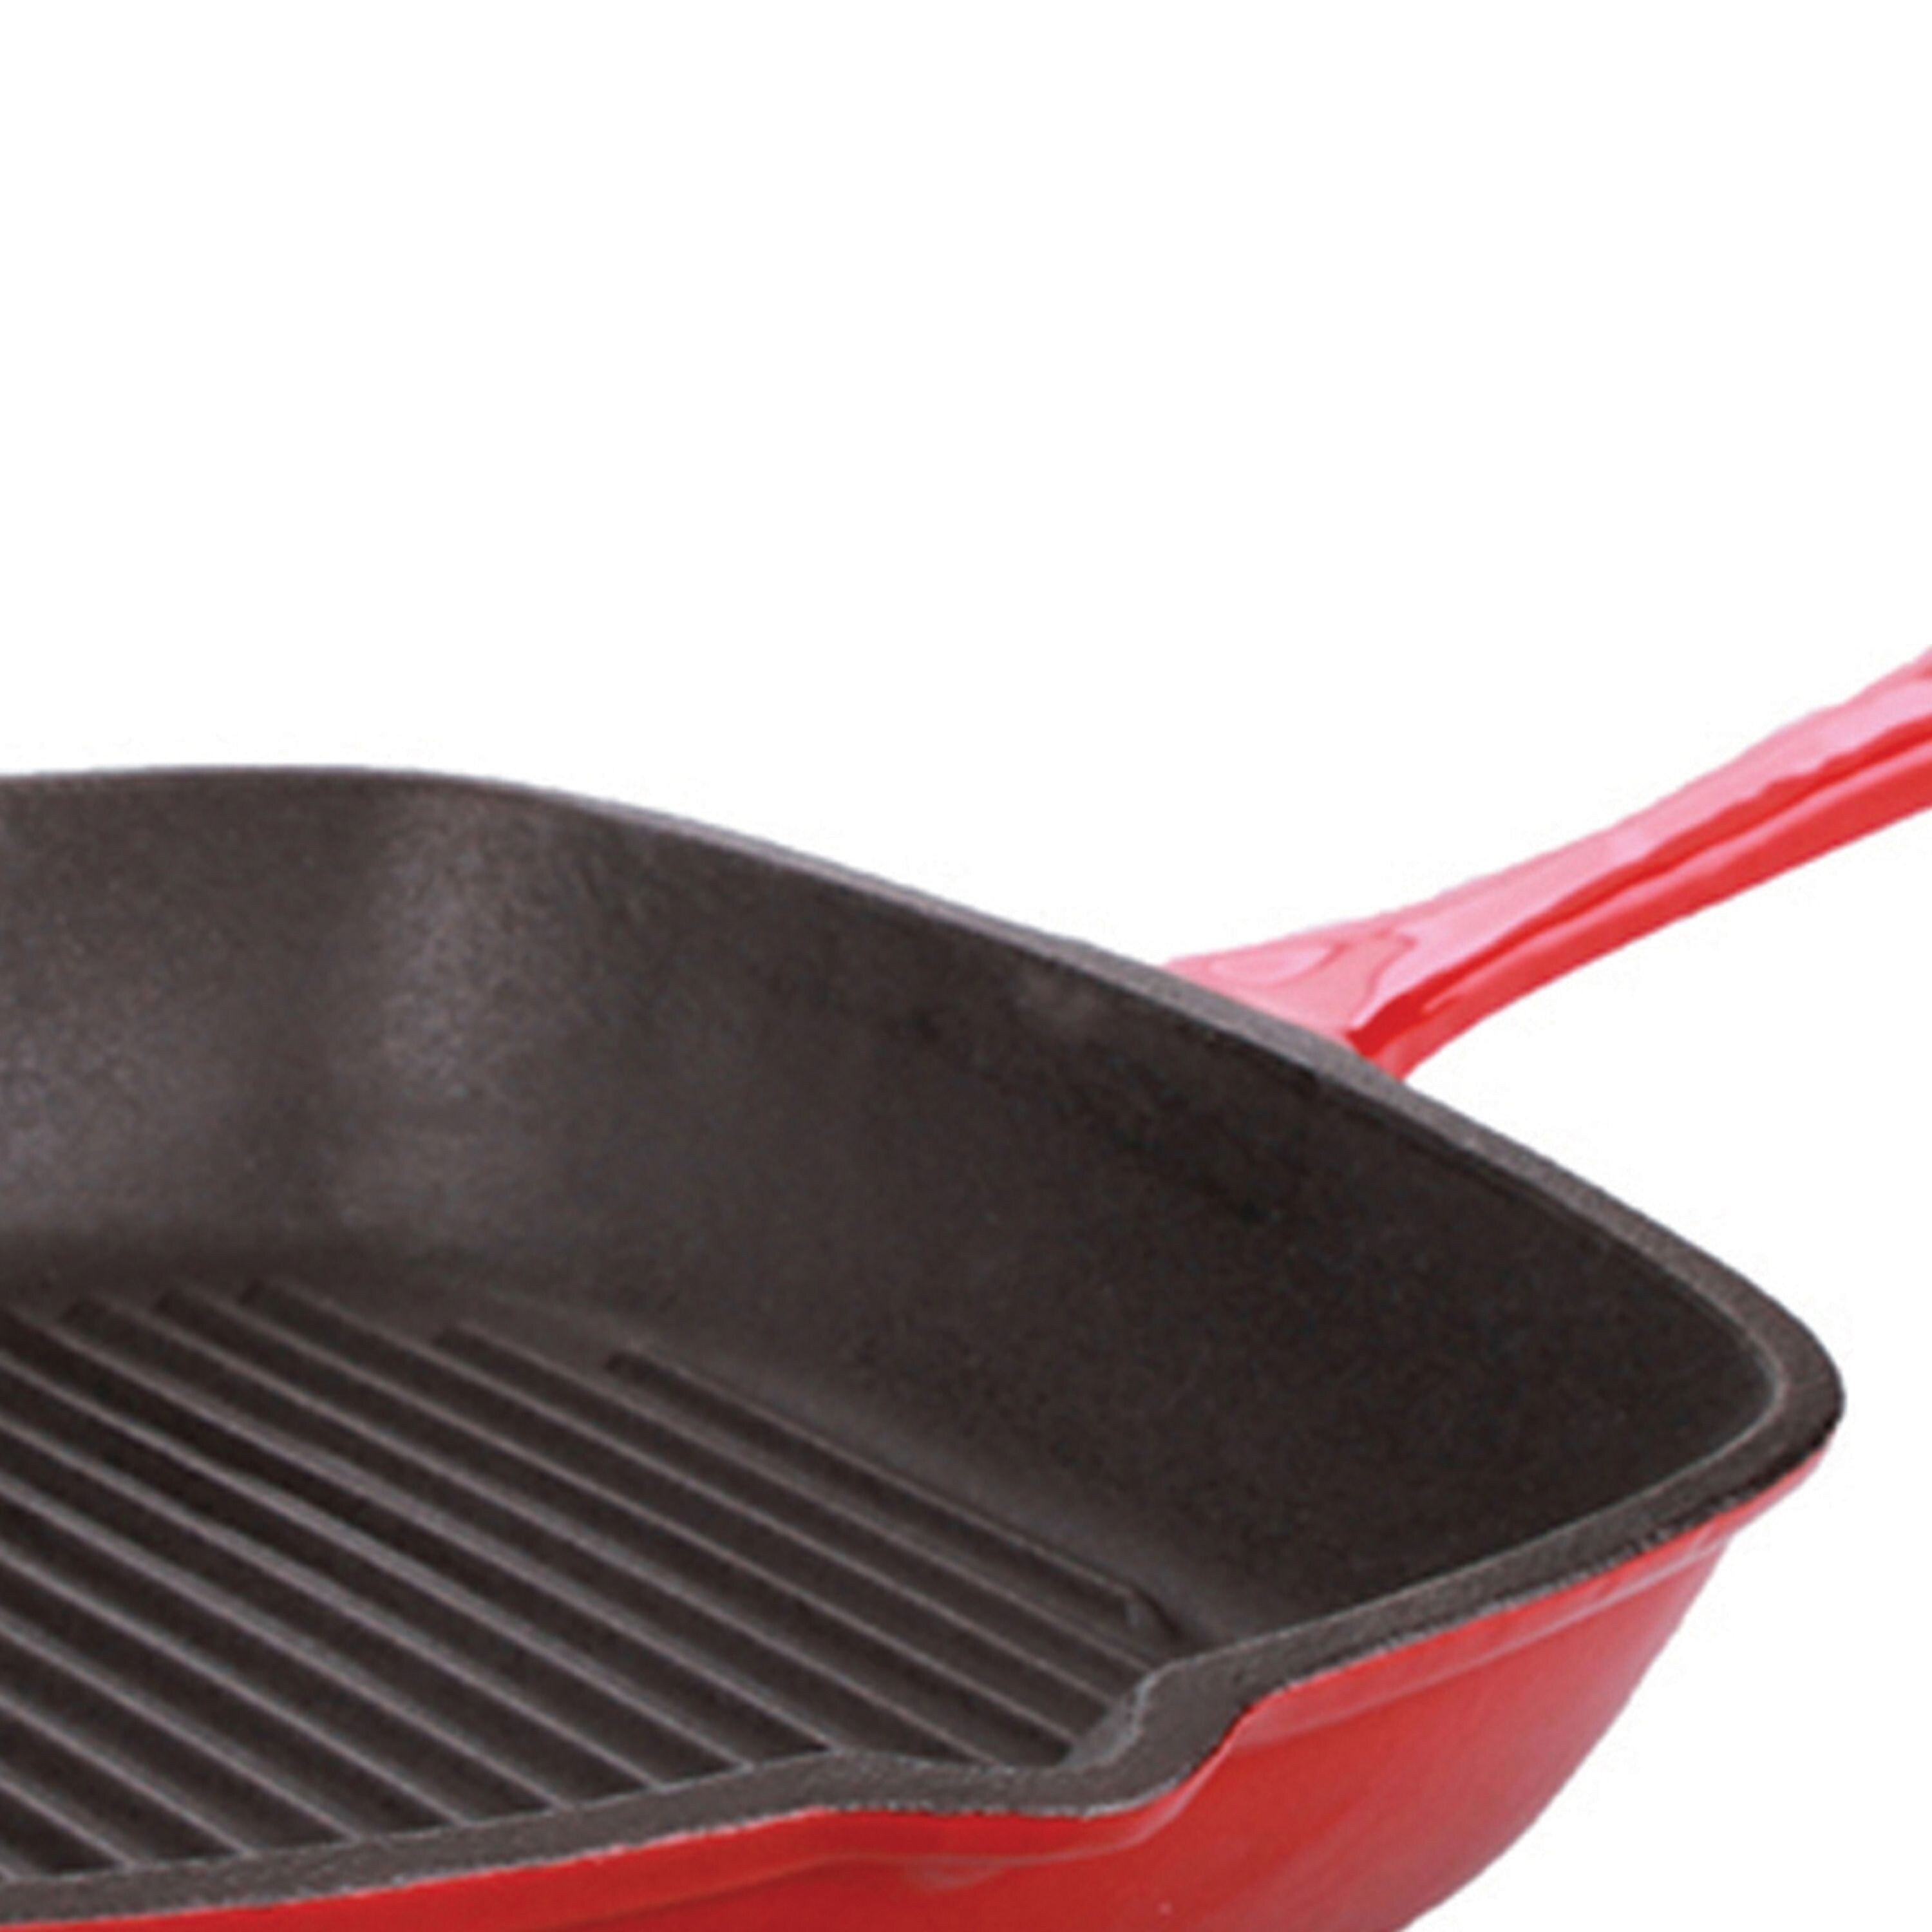 BergHOFF Neo 10Pc Cast Iron Cookware Set, Red